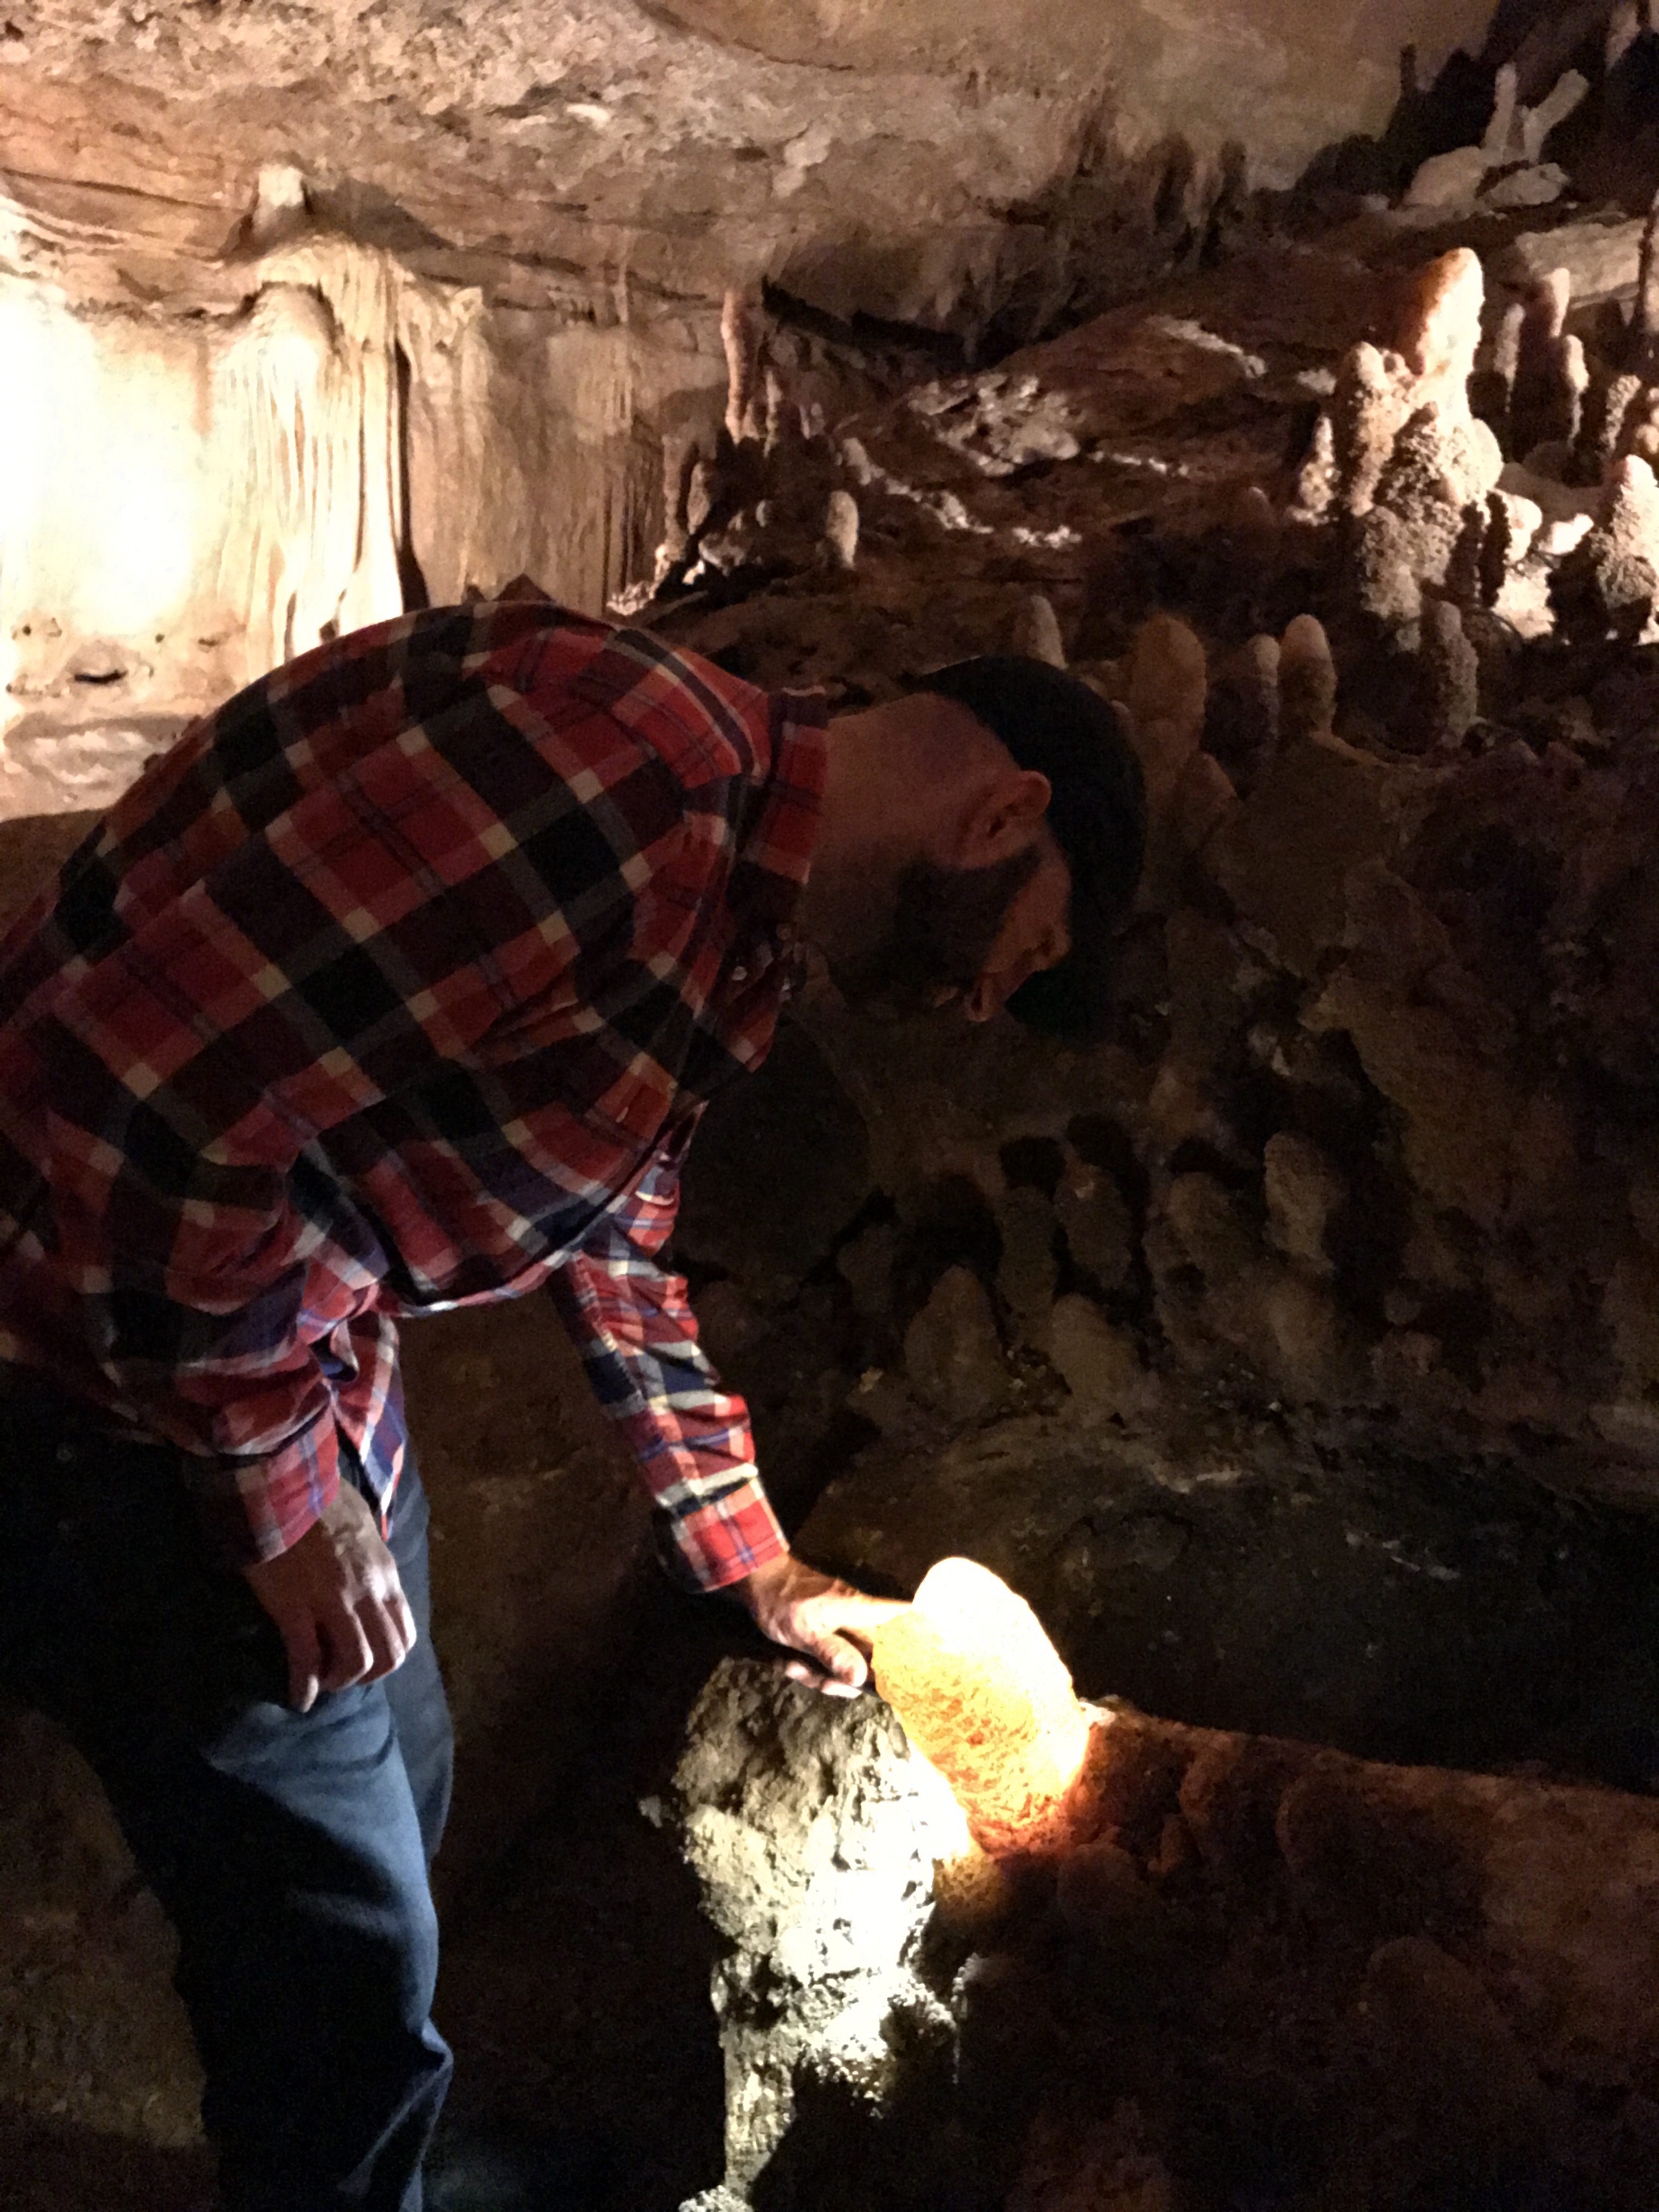 Using a flashlight to light up the cave